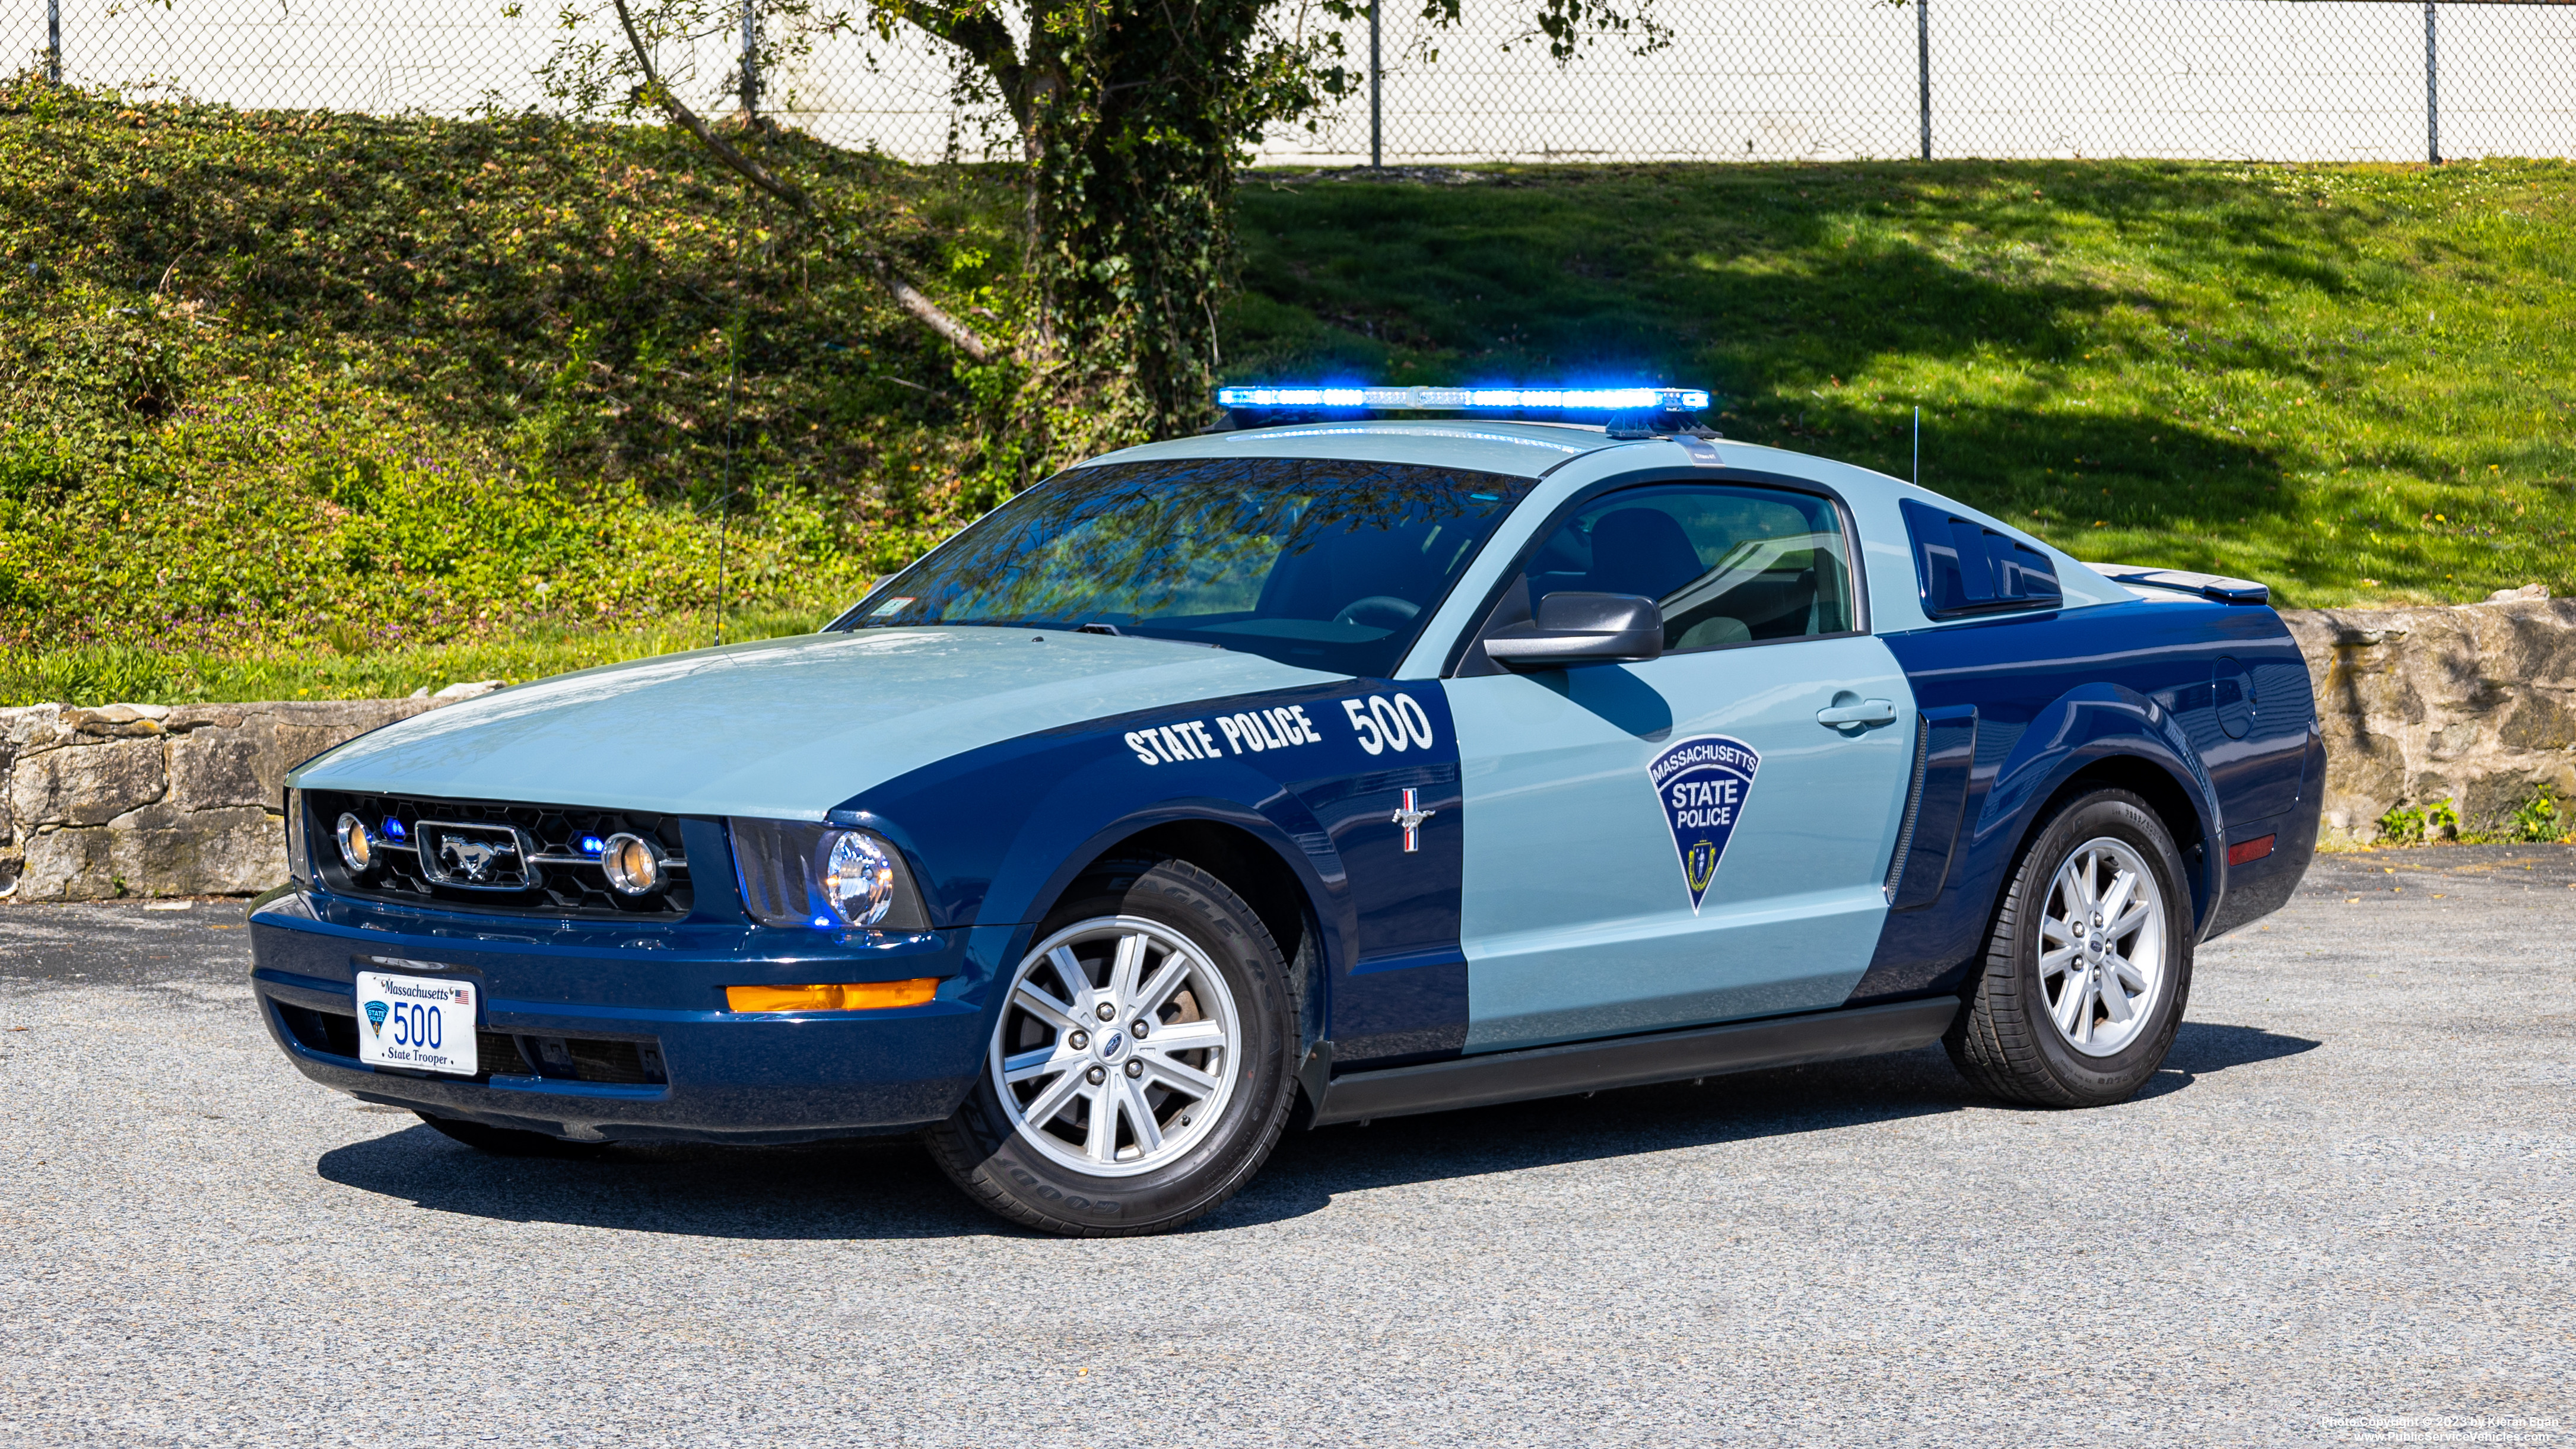 A photo  of Massachusetts State Police
            Cruiser 500, a 2006 Ford Mustang             taken by Kieran Egan